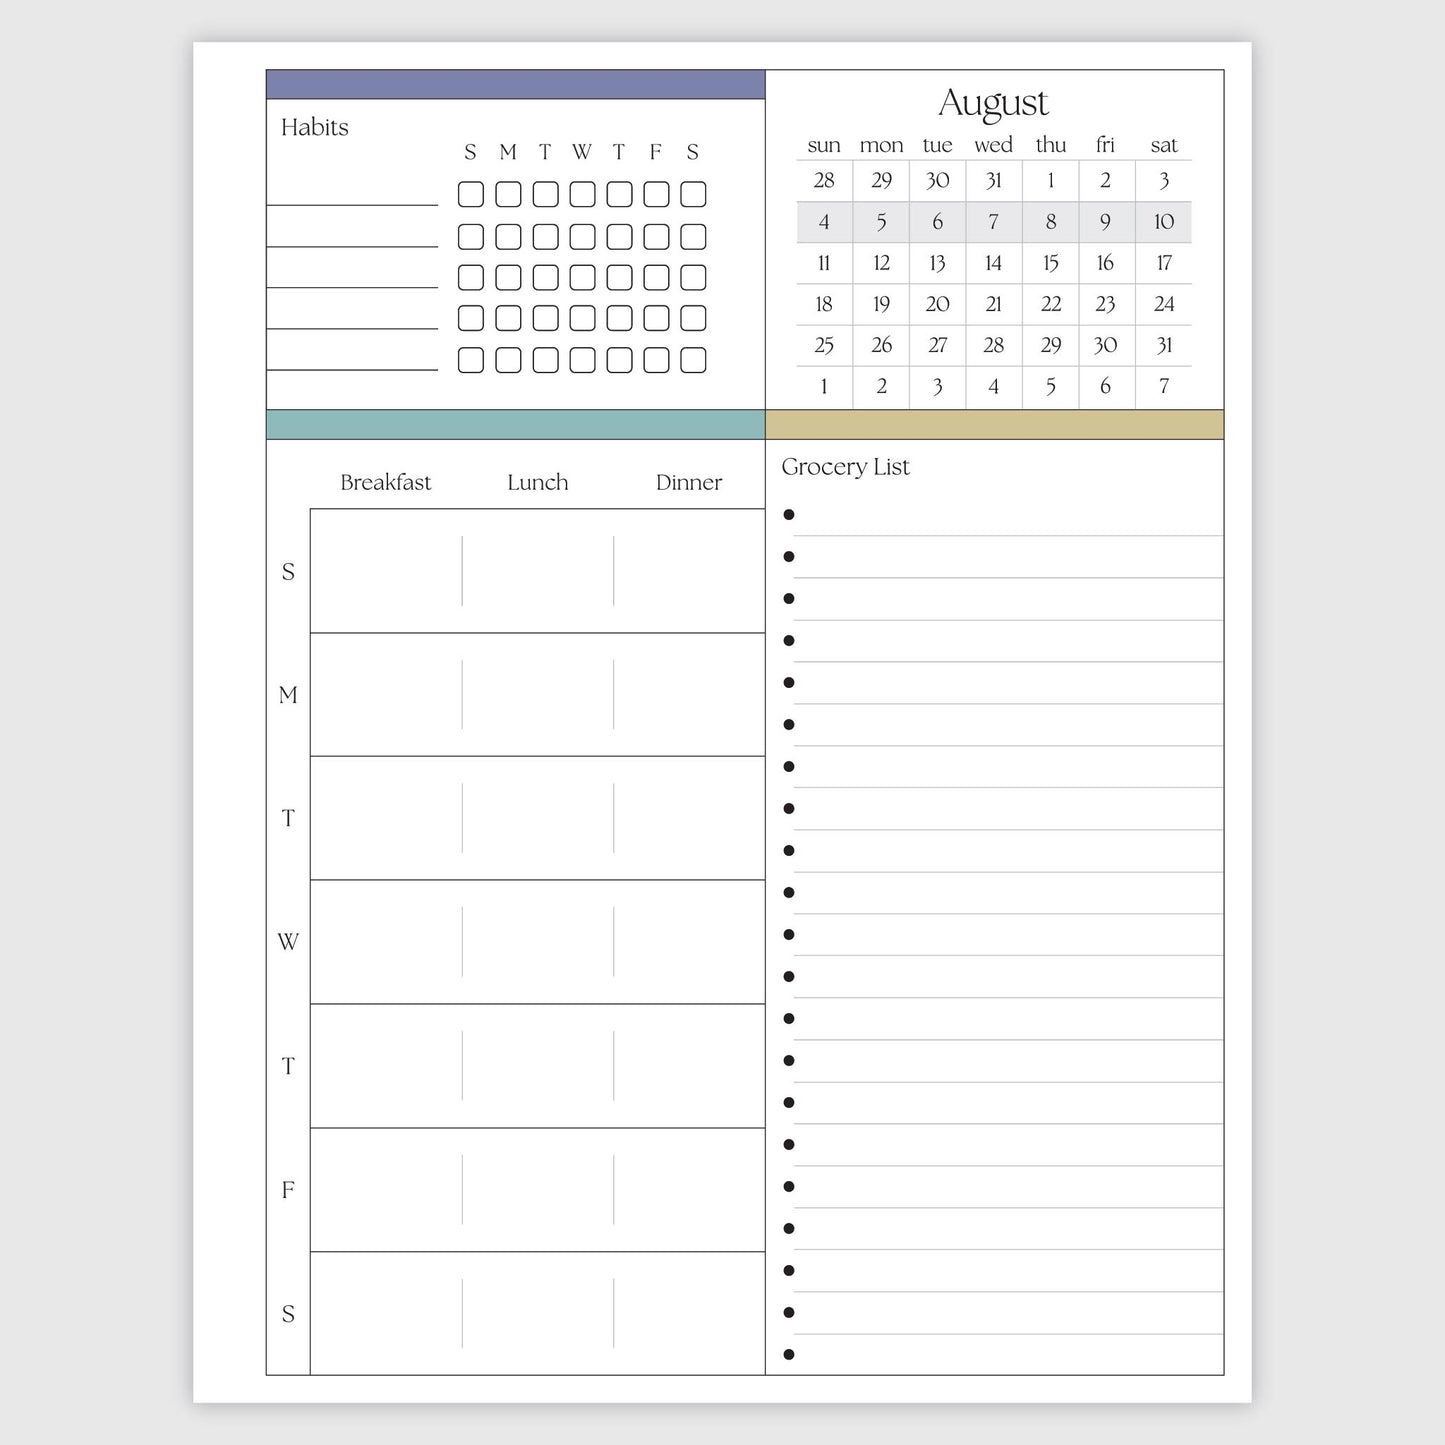 The Works Daily Planner - Mariposa